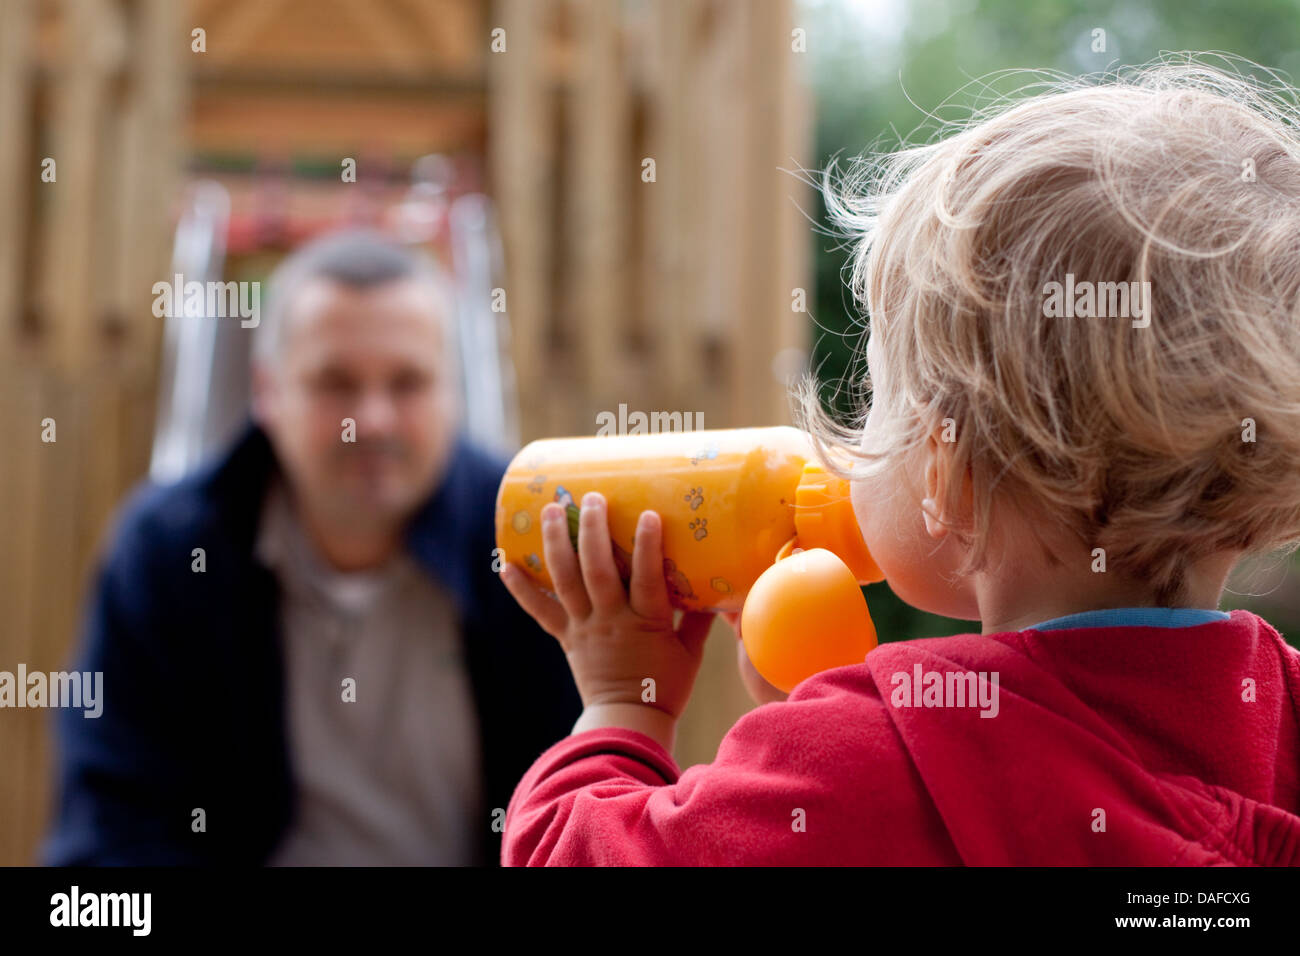 Germany, Girl drinking from bottle, father in background Stock Photo